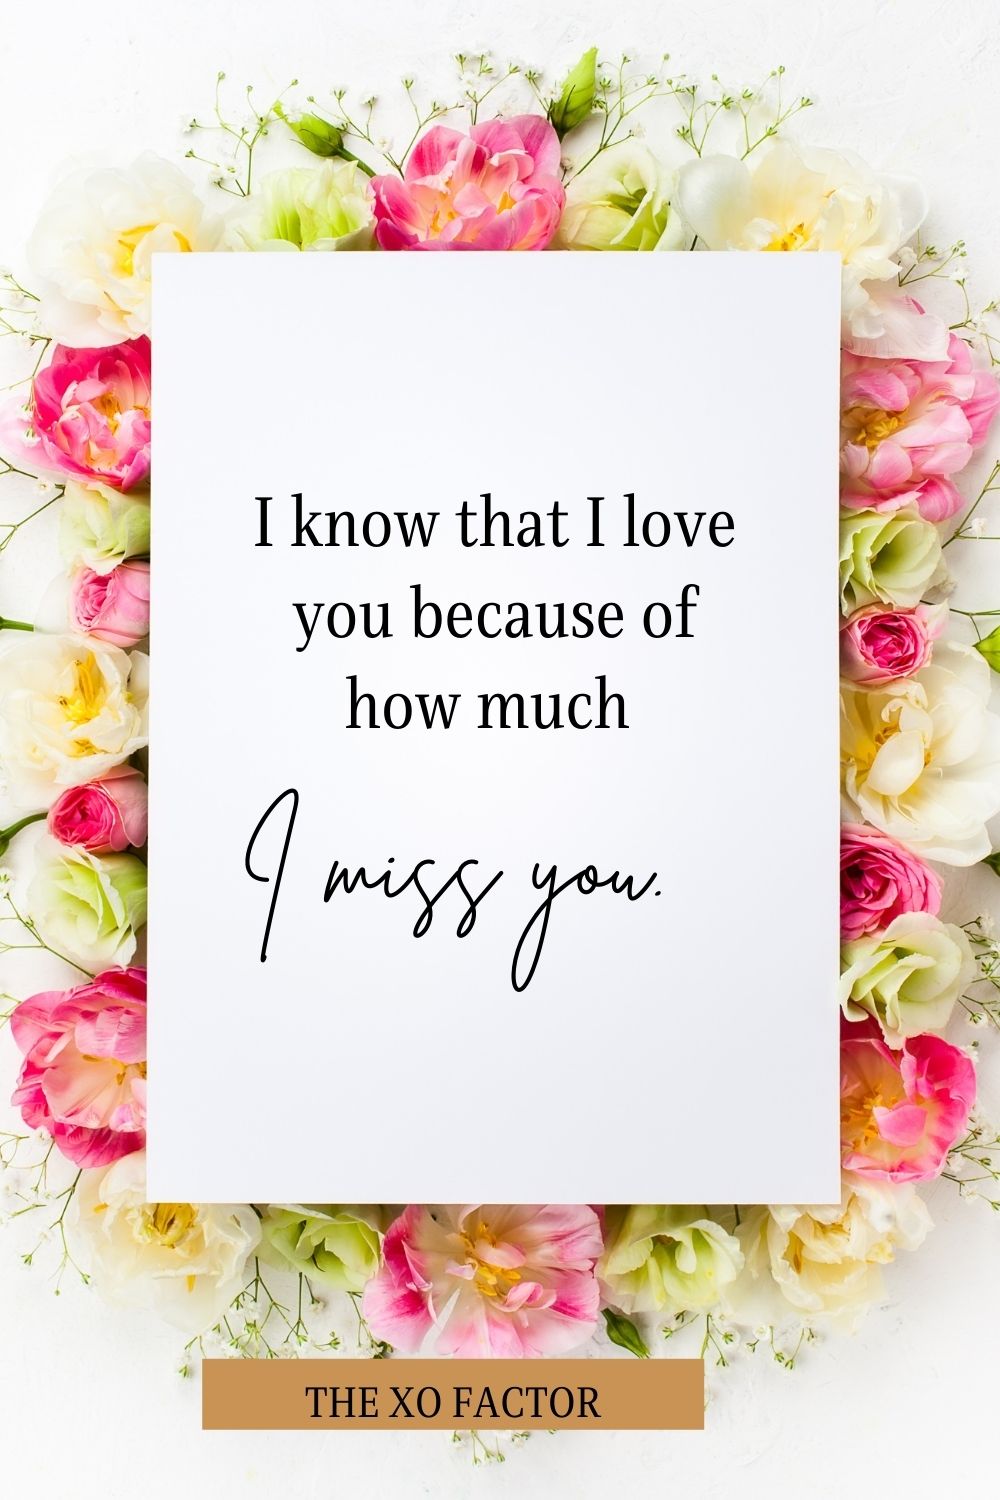 I know that I love you because of how much I miss you.